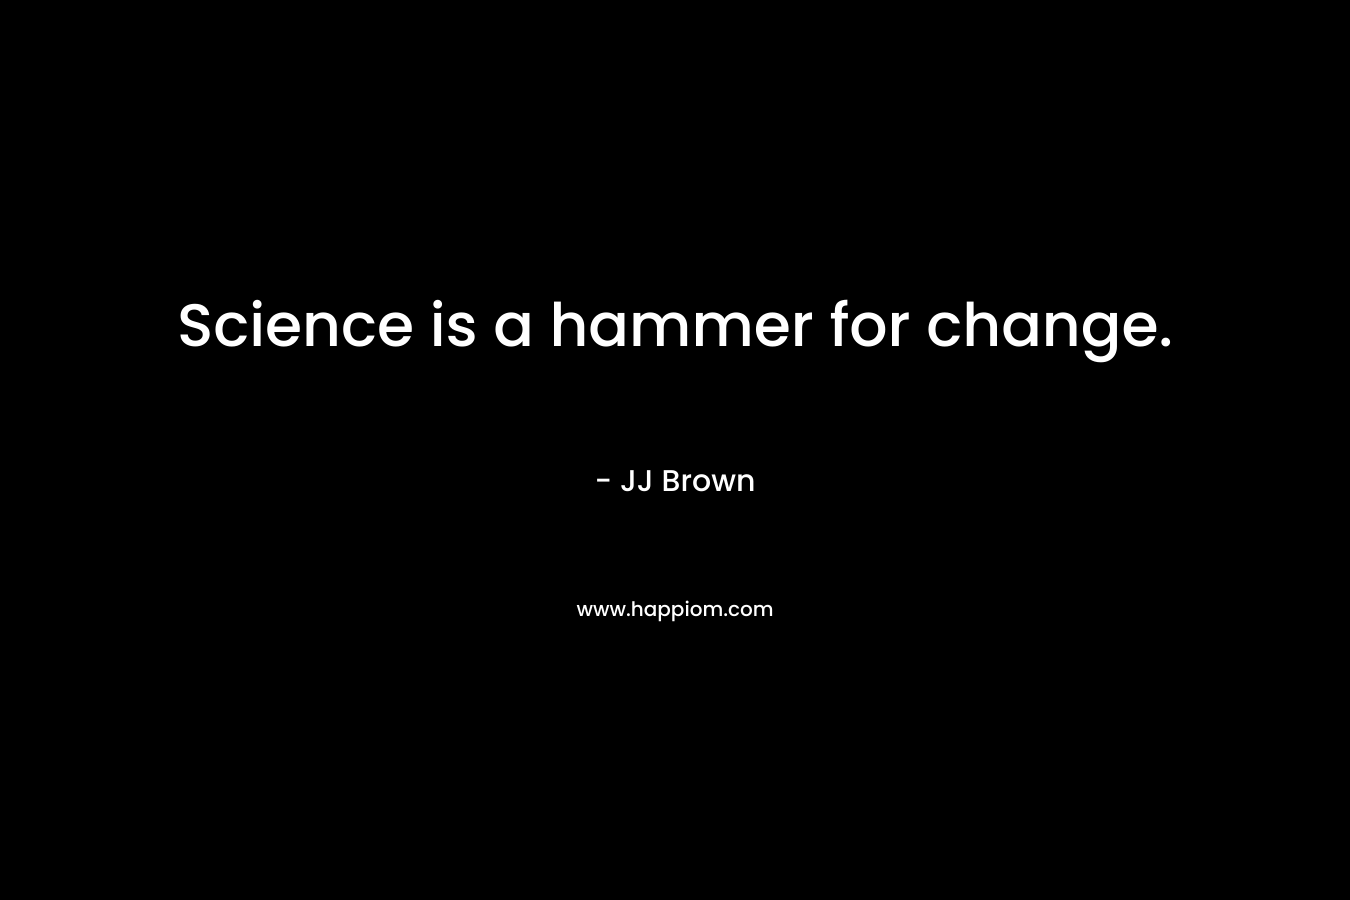 Science is a hammer for change.